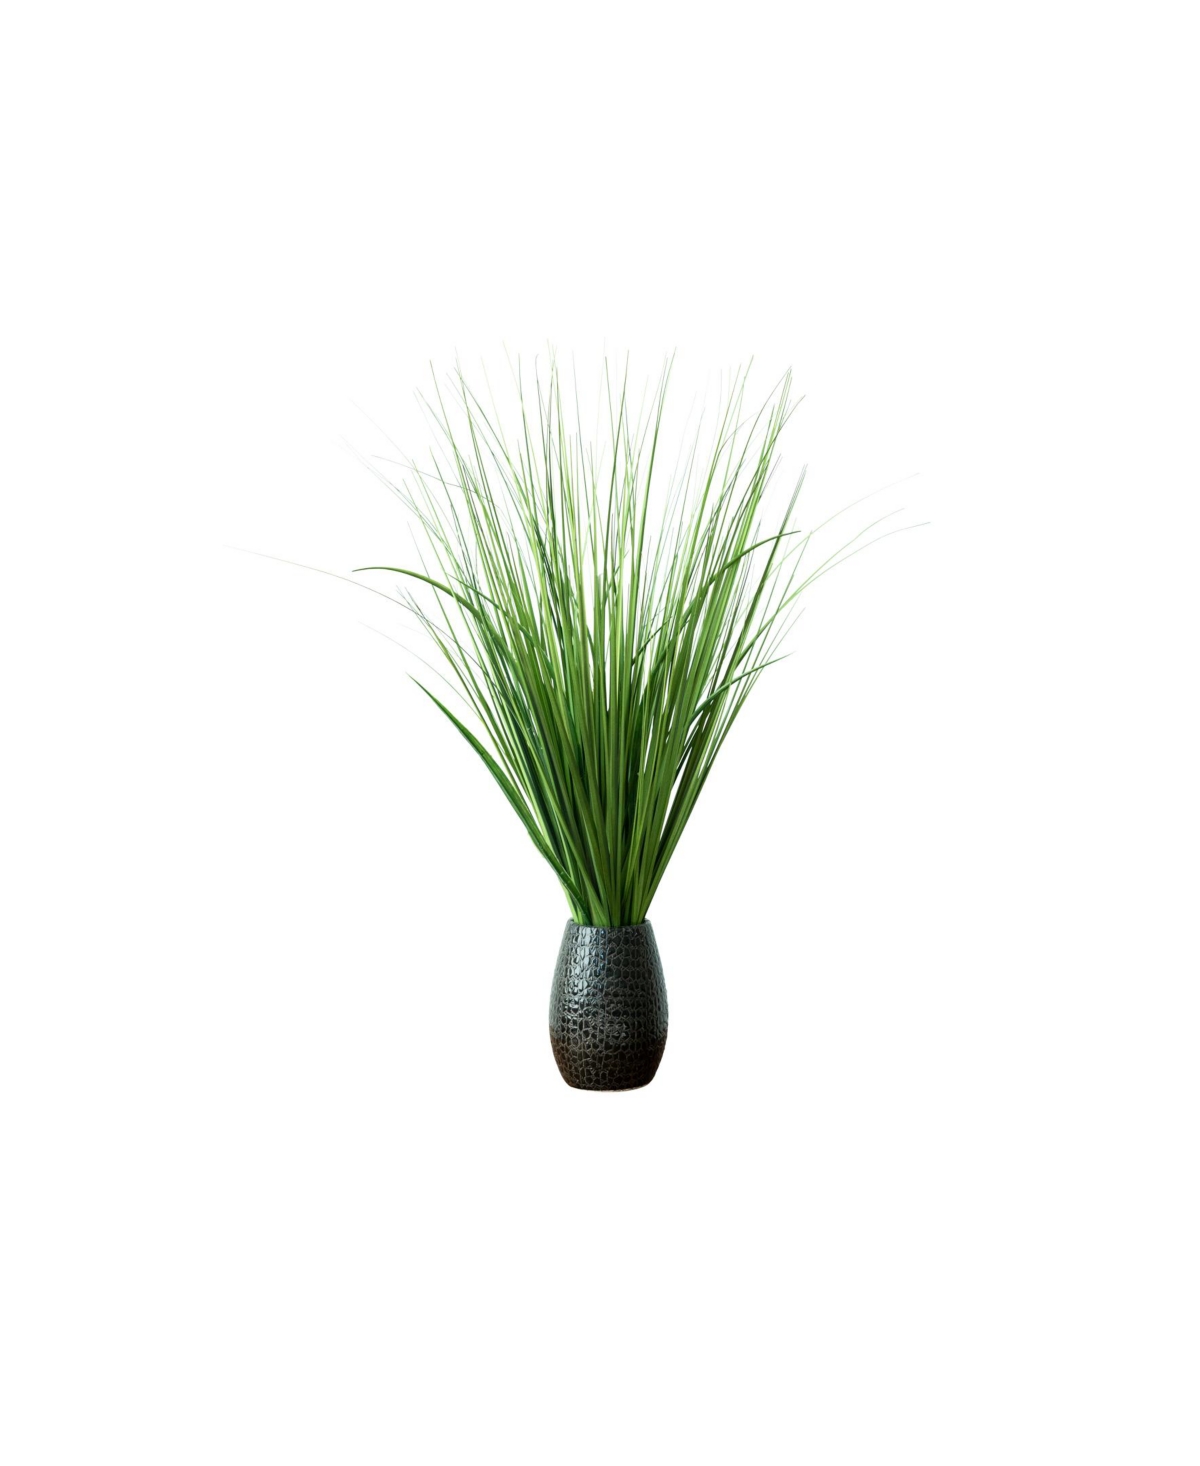 Tabletop Artificial Foliage in Crackled Pot - Black